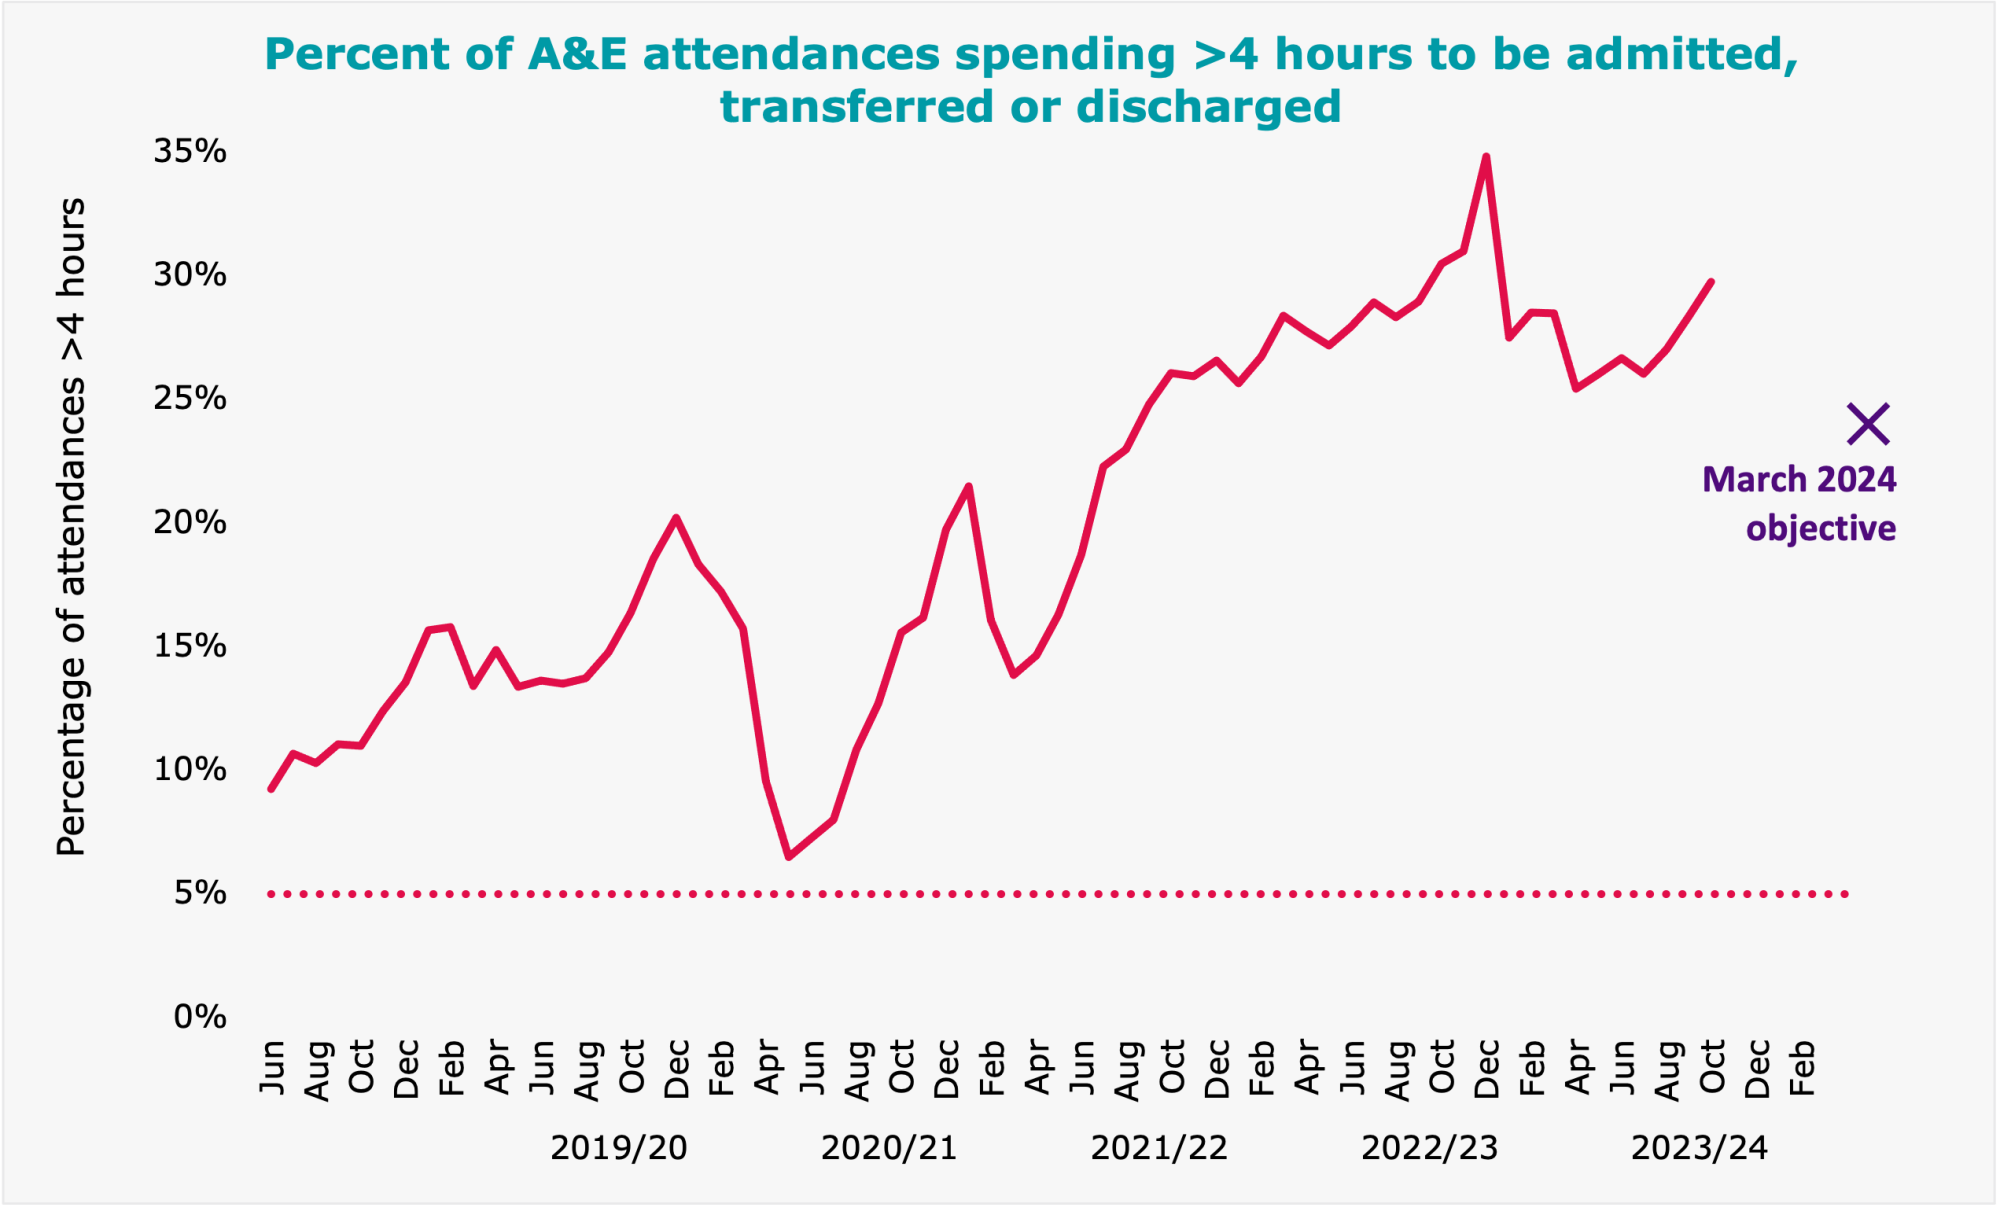 The percentage of people spending more than four hours waiting in A&E is still on a gradual upward trajectory and well away from target